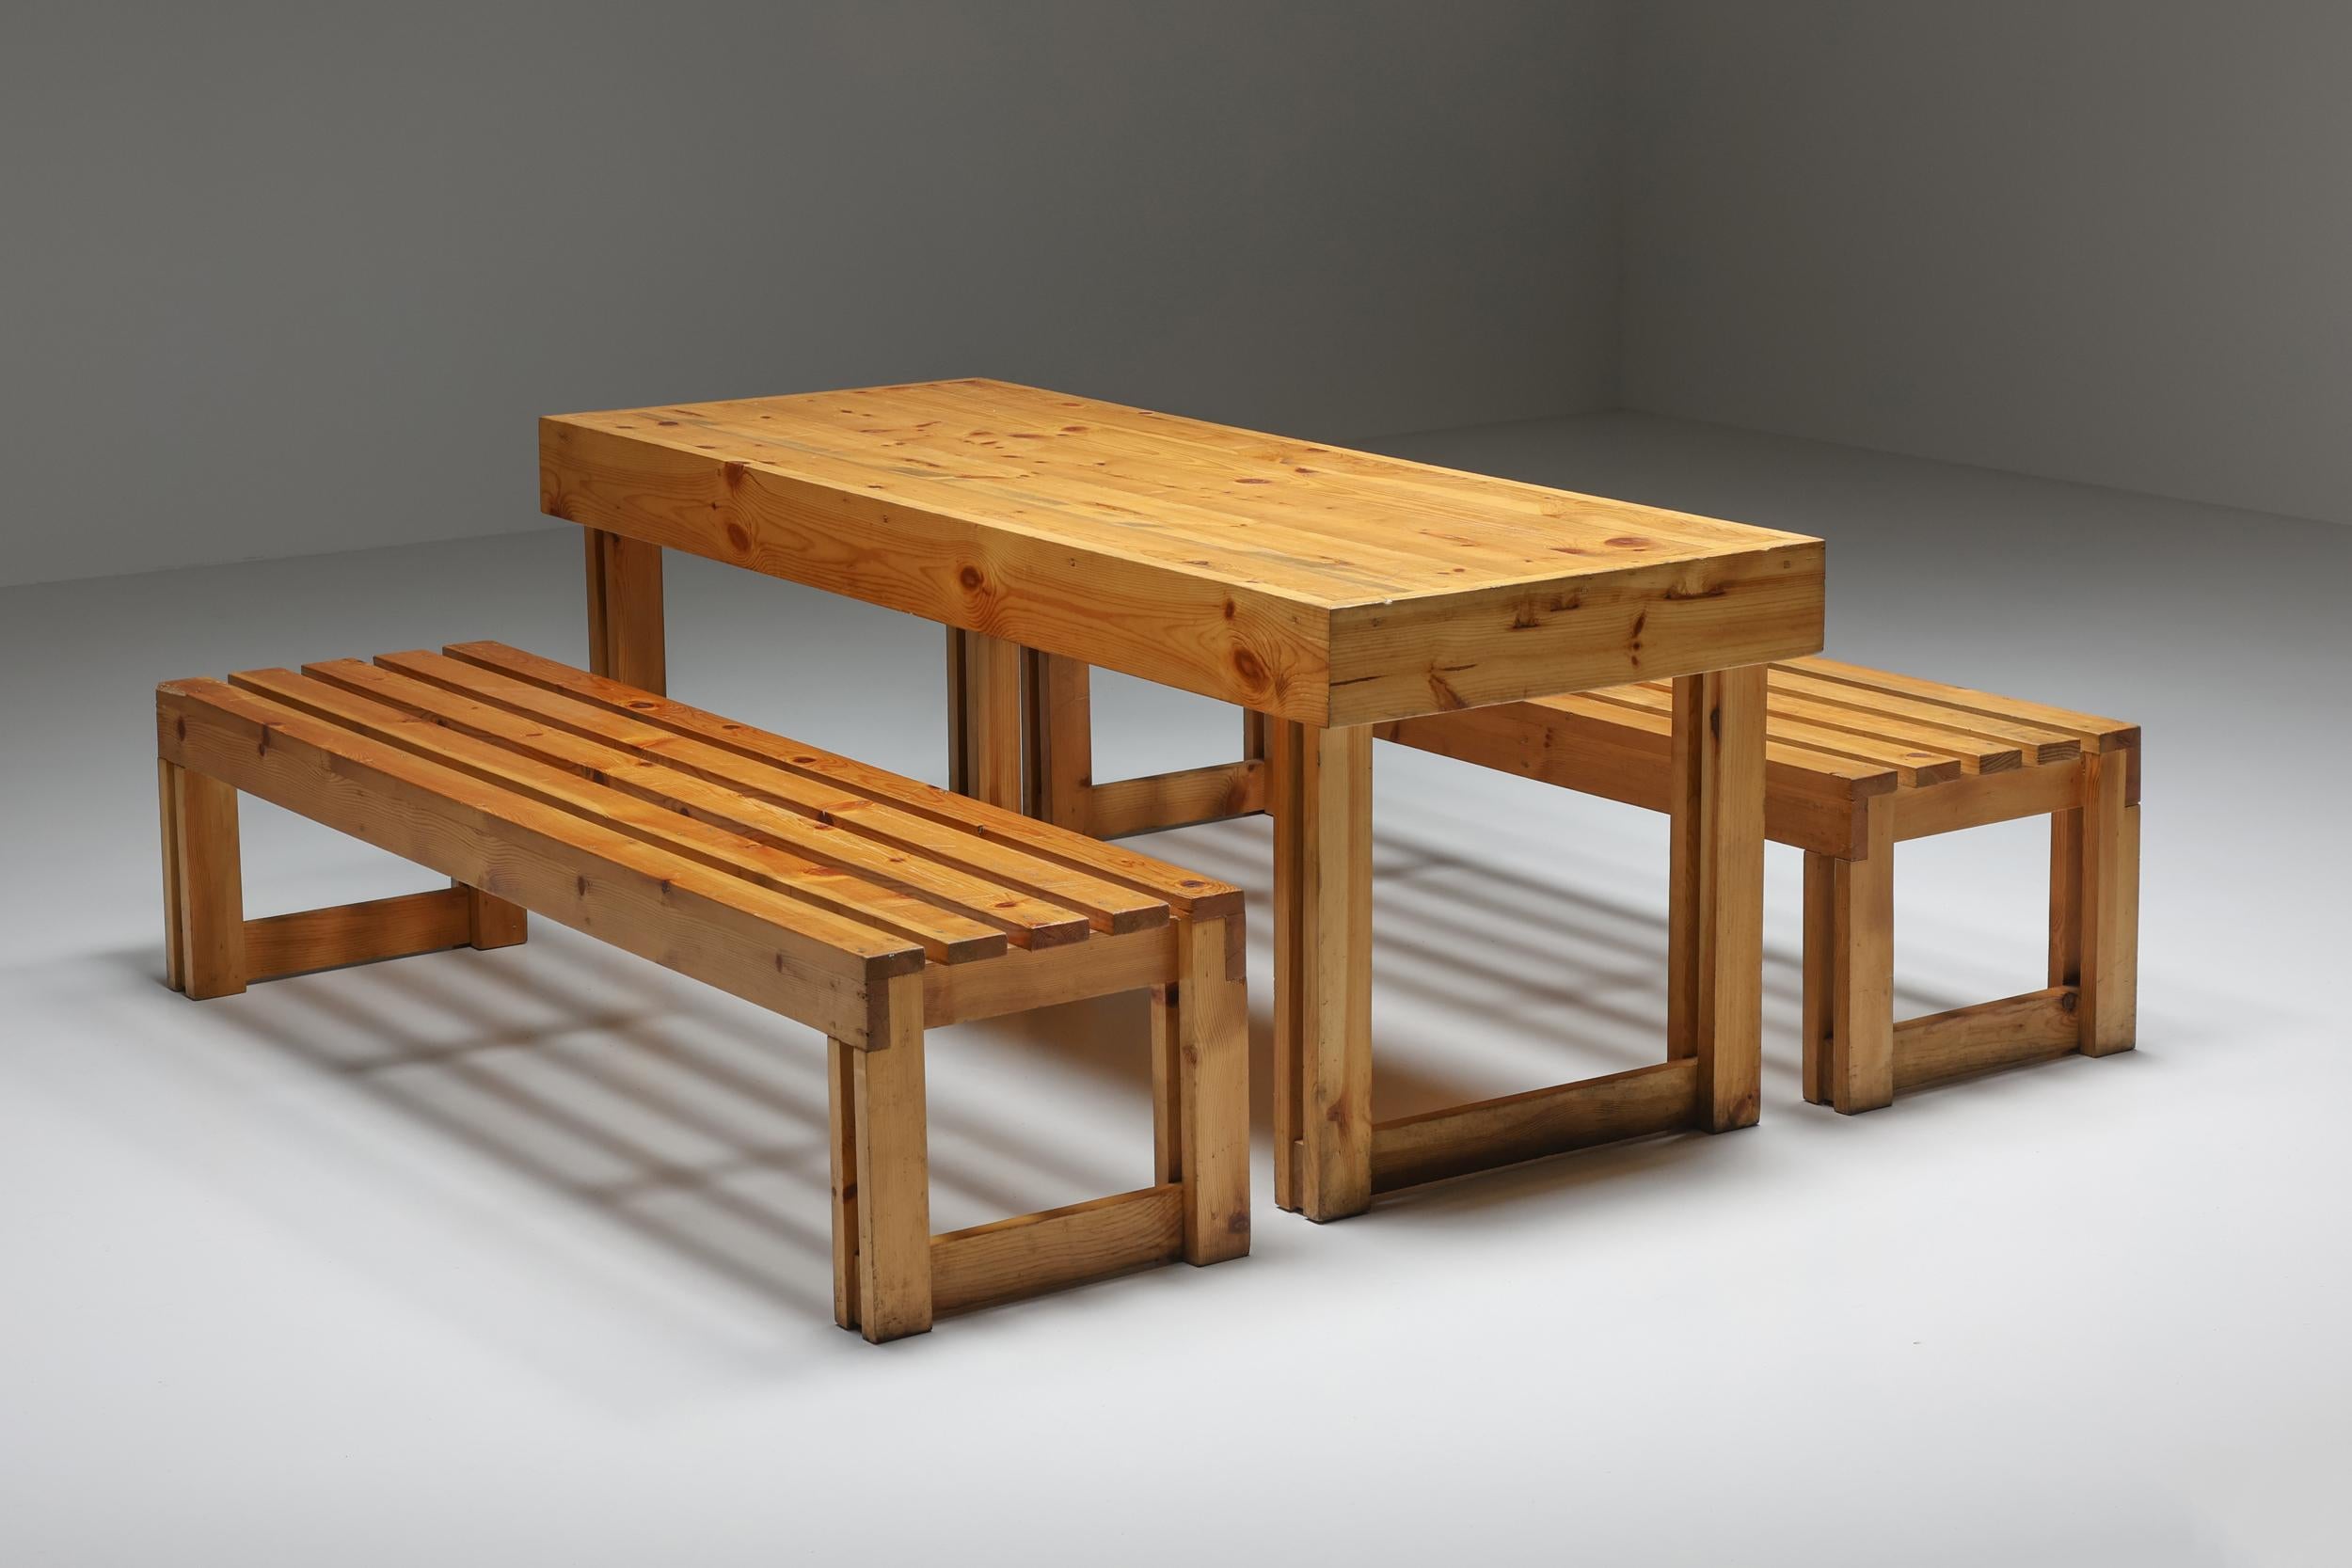 Italian Pine Bench Set from Old Vineyard, Modernist, Italy, 1960's For Sale 5